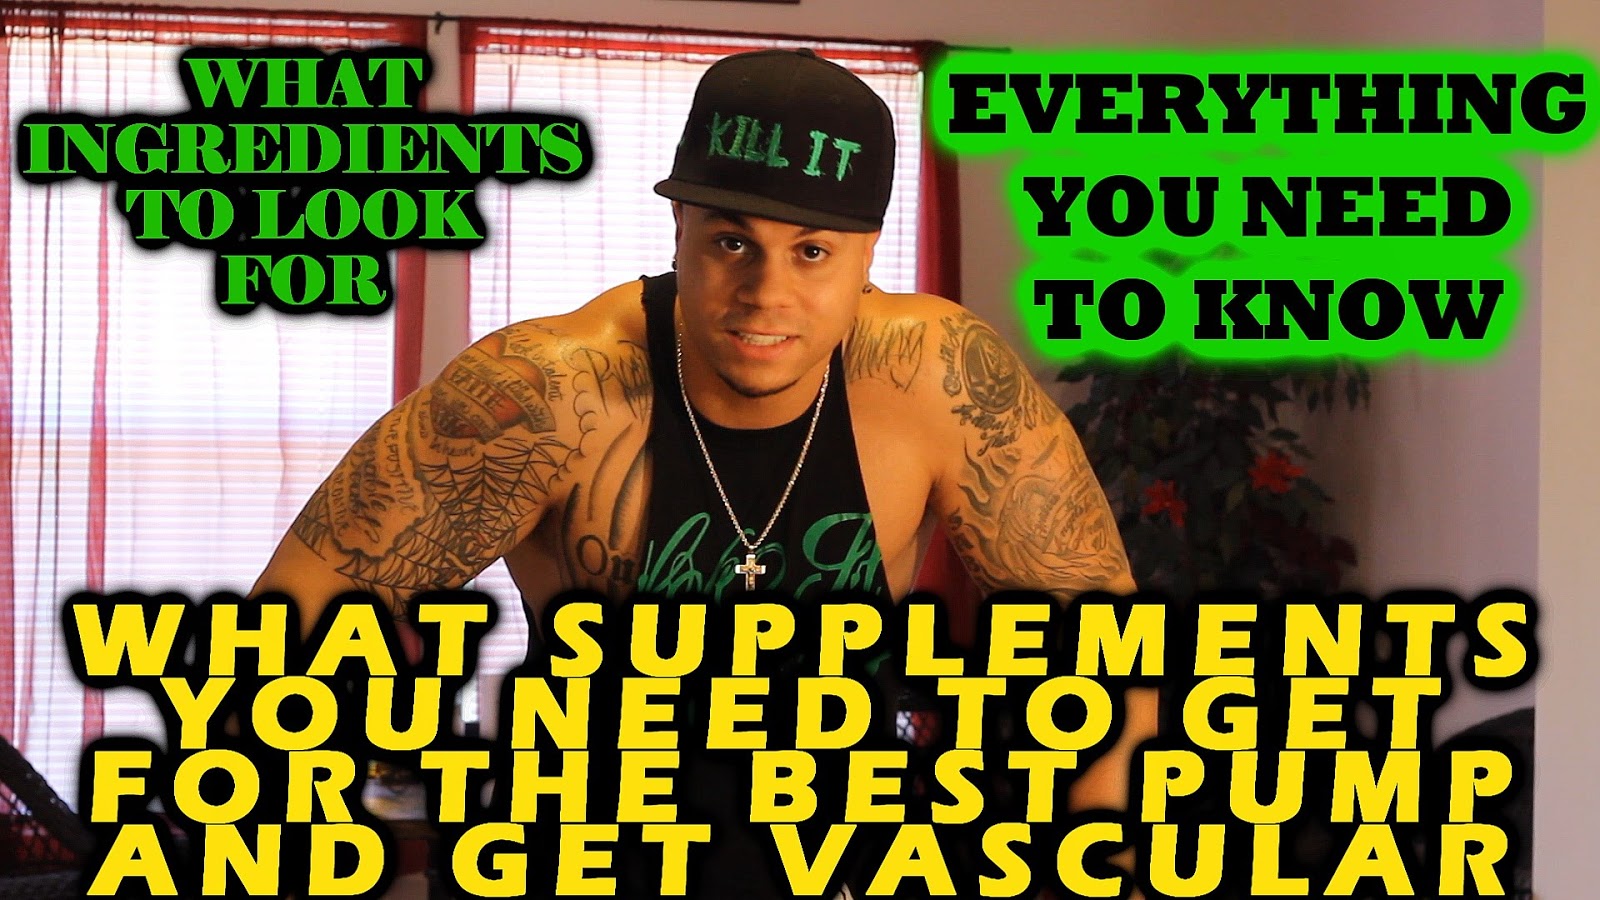 What Supplements Should You Take to Get Better Results?